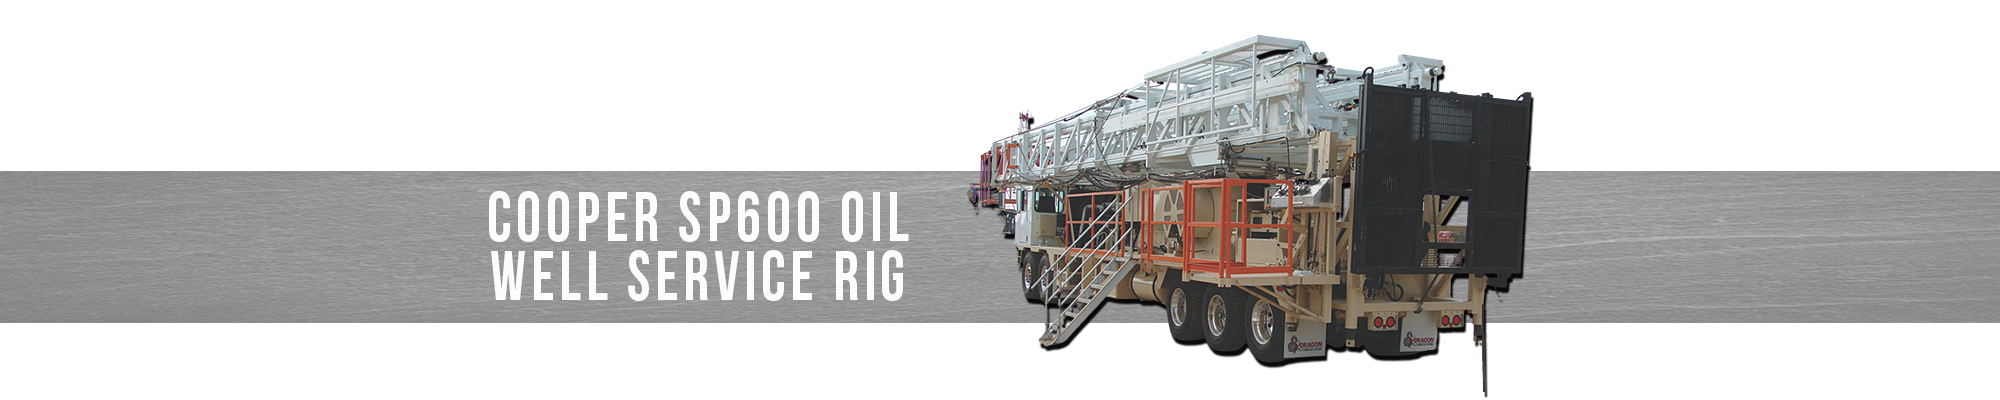 Cooper SP600 Oil Well Service Rig